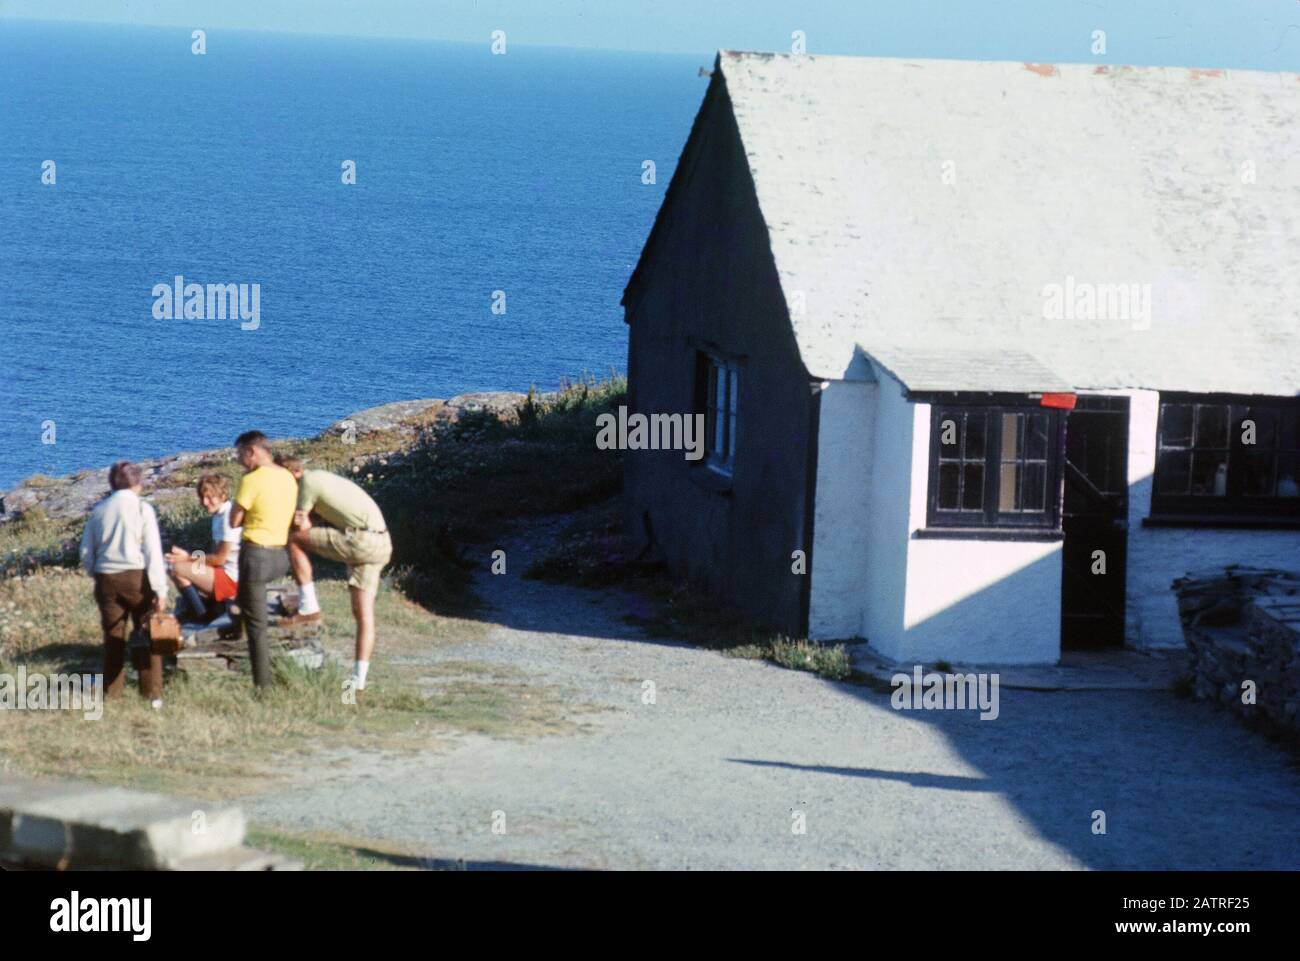 Vernacular photograph taken on a 35mm analog film transparency, believed to depict woman in yellow shirt and blue denim shorts standing beside white and black house near body of water, 1970. Major topics/objects detected include Sea and Beach. () Stock Photo